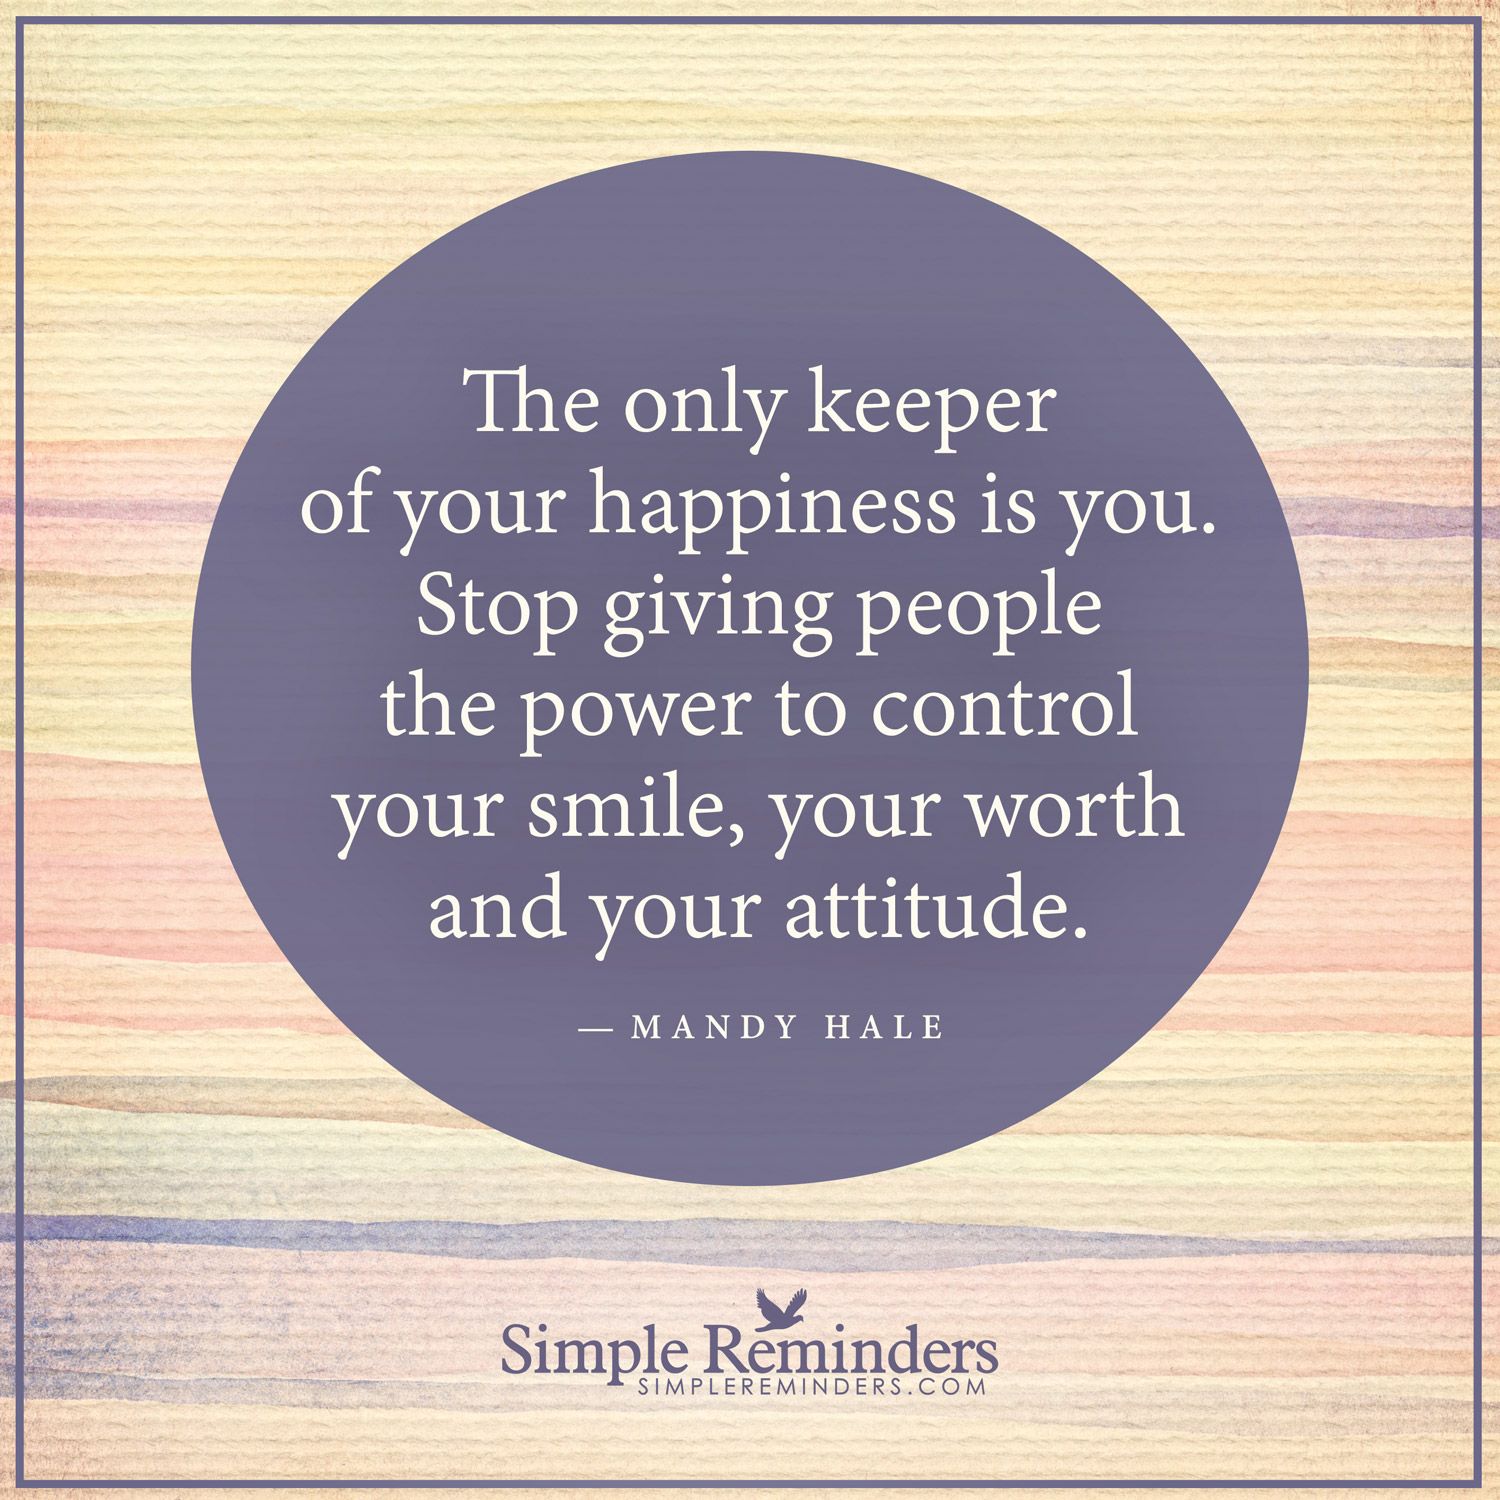 The keeper of your happiness is you – I Love Law of Attraction